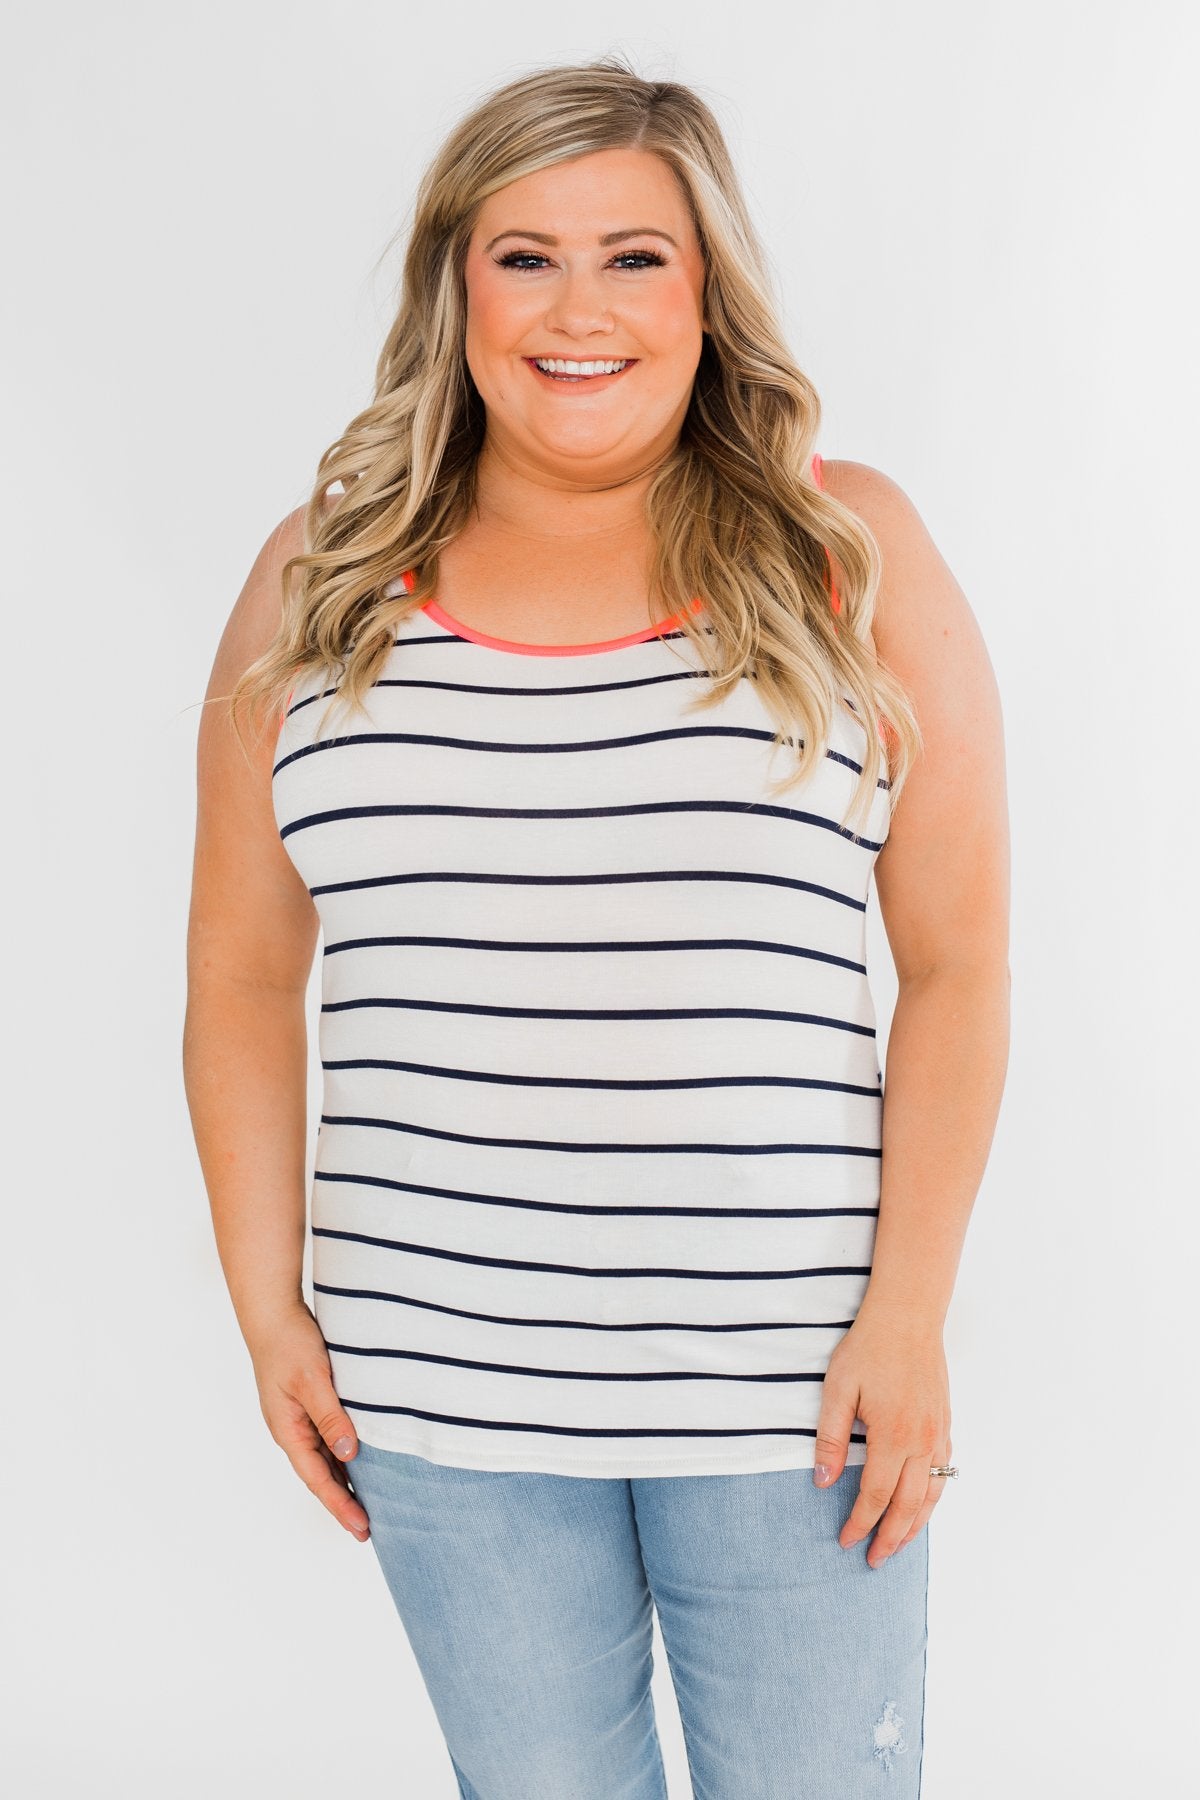 Only For Tonight Striped Tank Top- Navy & Pink